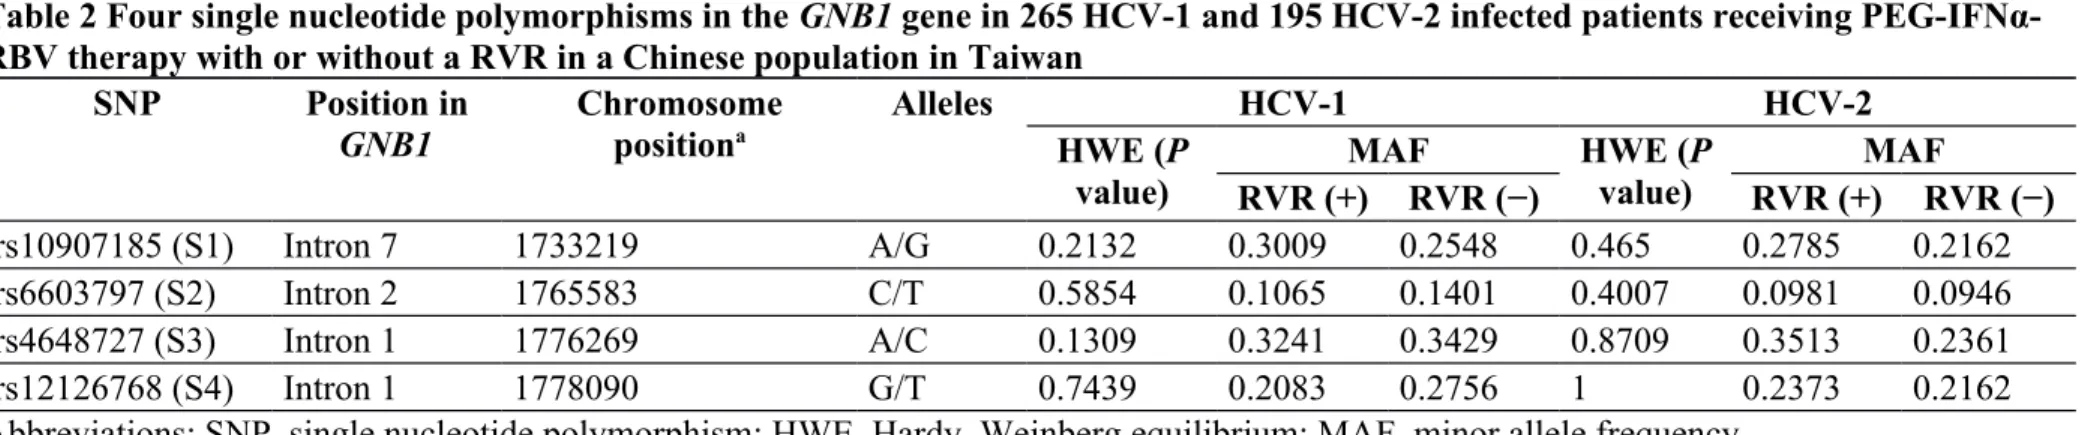 Table 2 Four single nucleotide polymorphisms in the GNB1 gene in 265 HCV-1 and 195 HCV-2 infected patients receiving PEG-IFNα- PEG-IFNα-RBV therapy with or without a RVR in a Chinese population in Taiwan